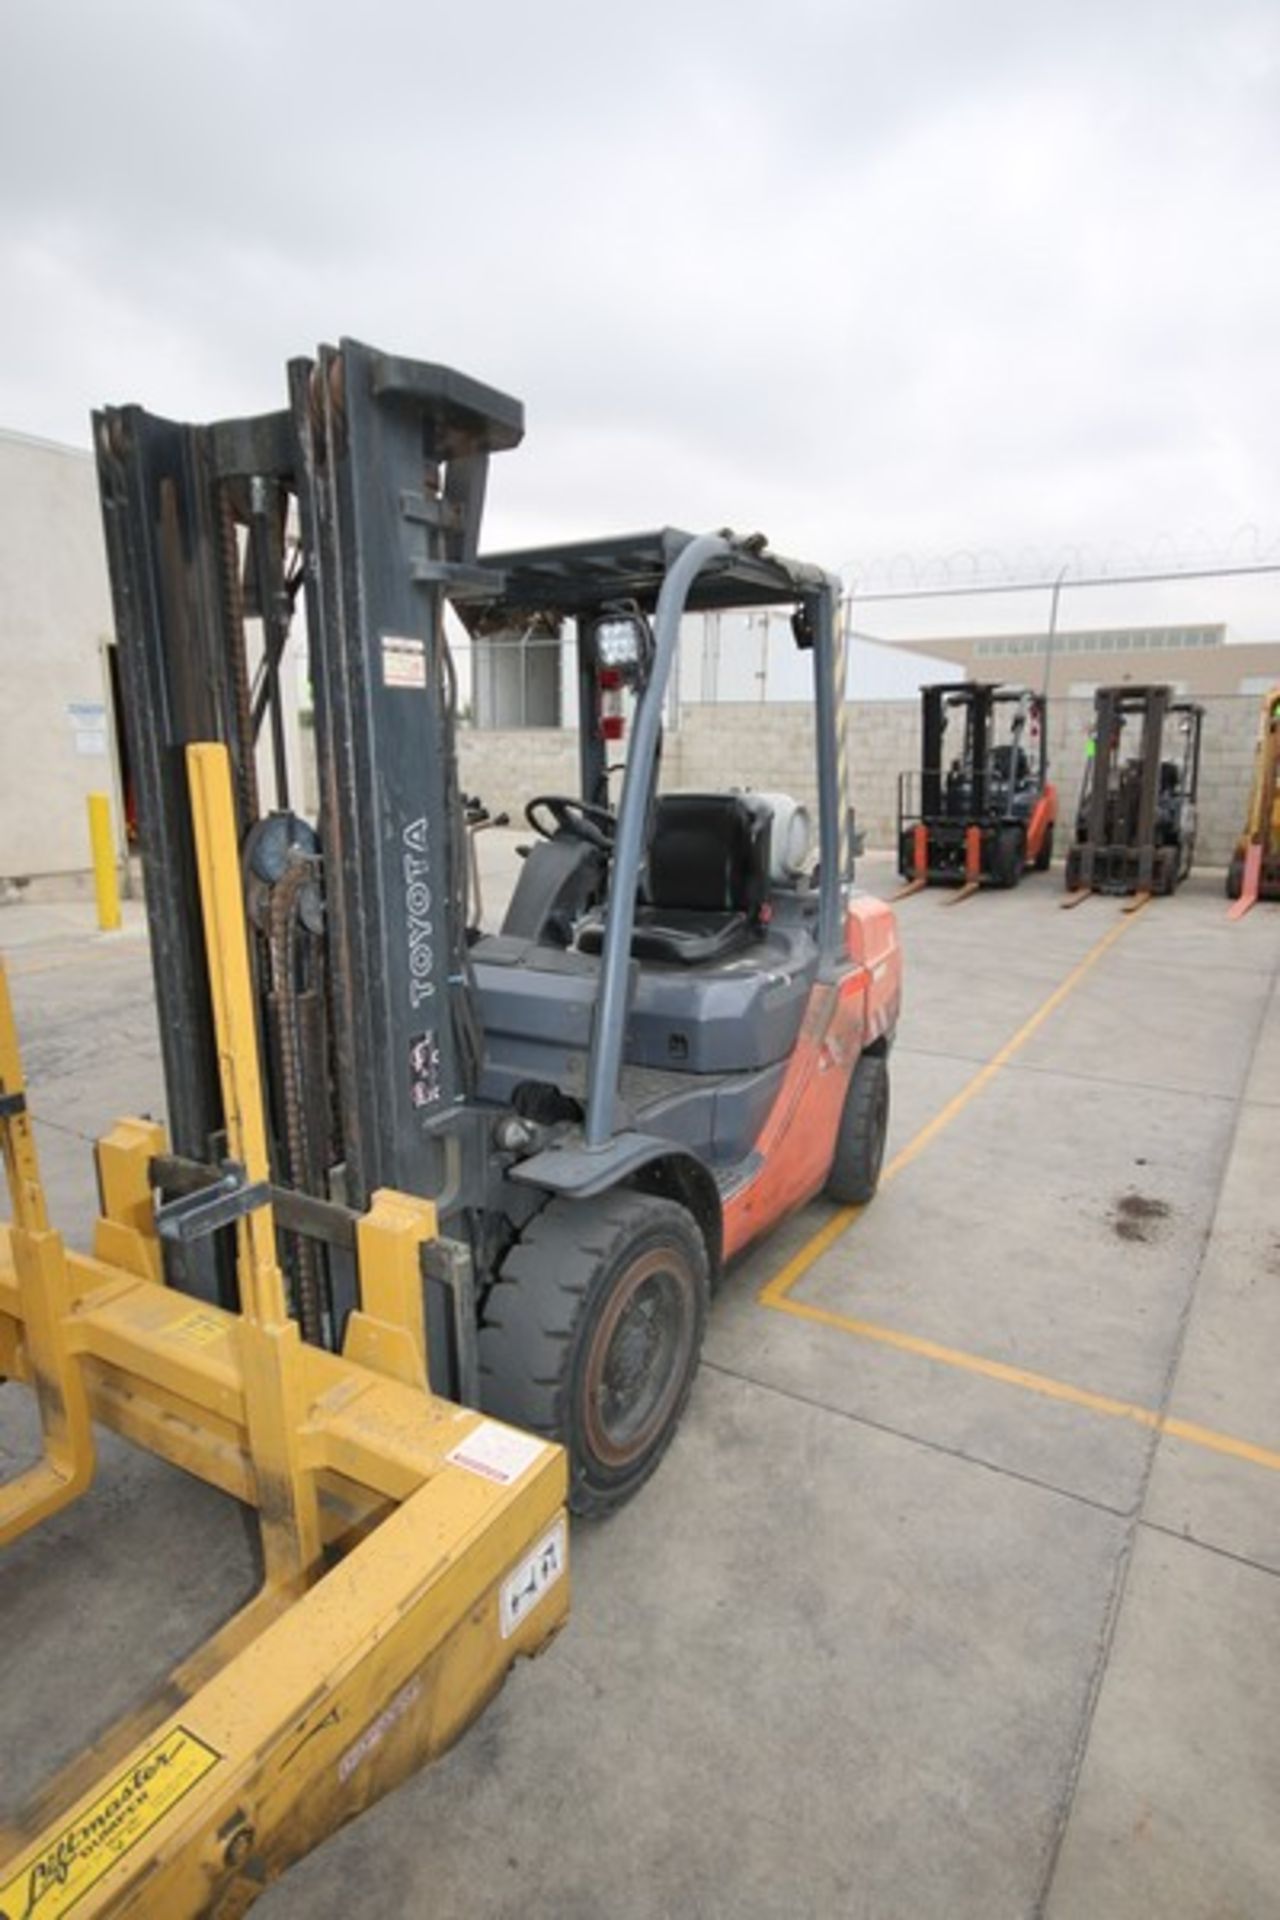 Toyota 5,650 lb. Sit-Down Propane Forklift, M/N 8FGU30, S/N 12793, with 3-Stage Mast, with - Image 3 of 9